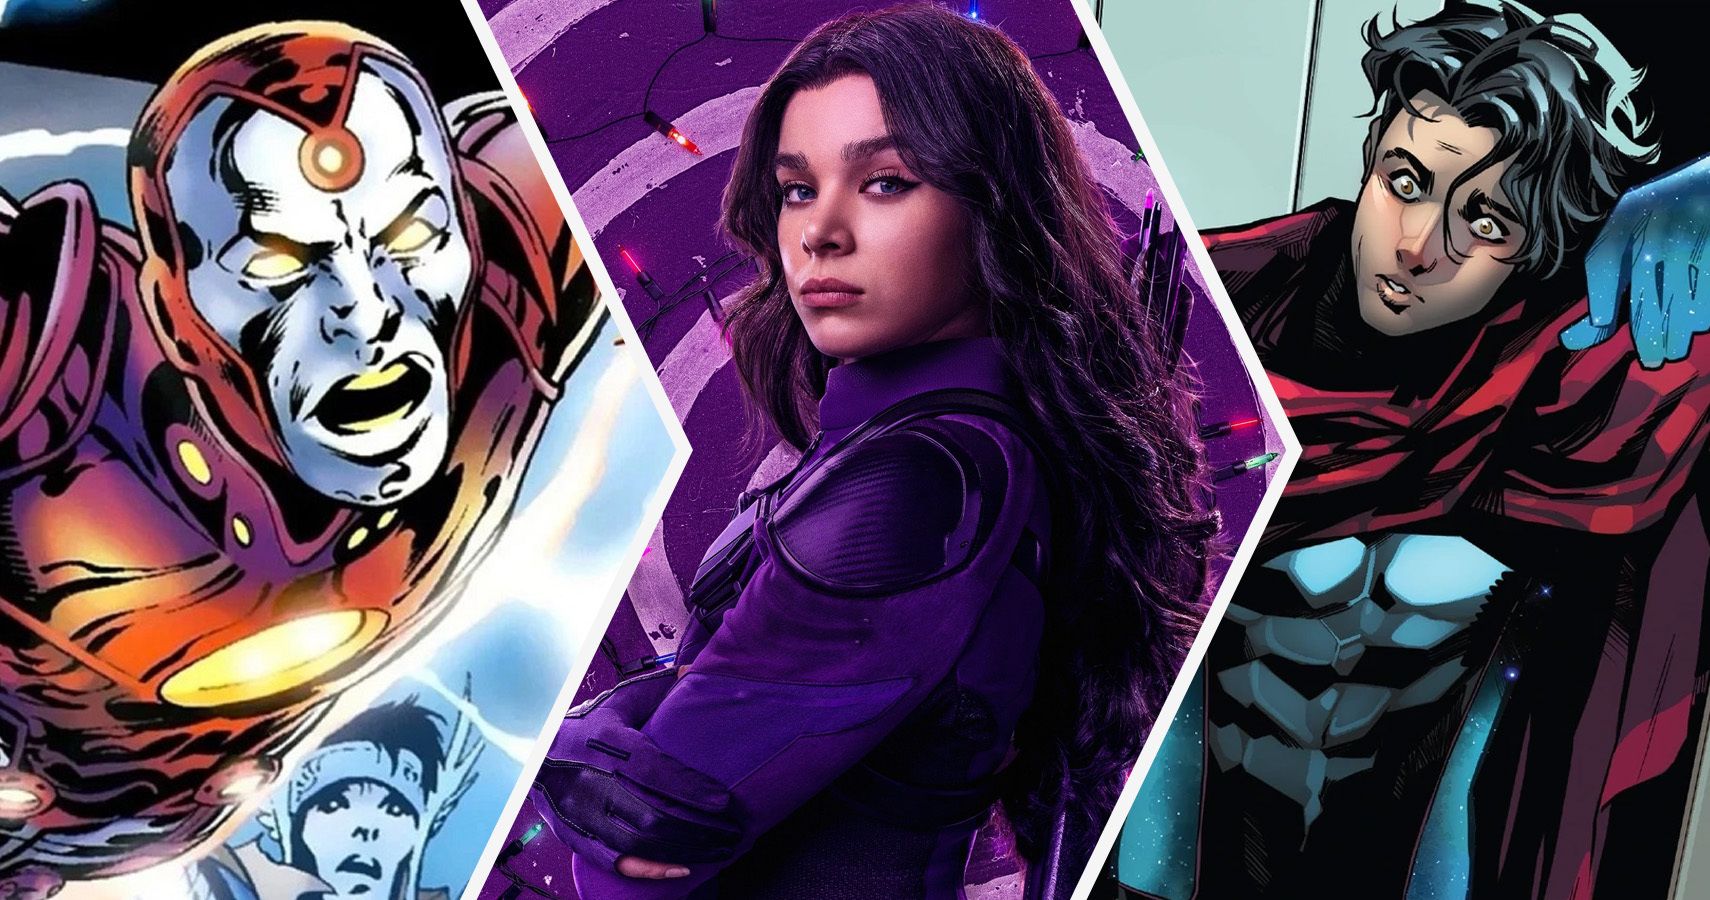 A split image of Iron Lad, Hawkeye (Kate Bishop) from the MCU, and Wiccan from Marvel Comics